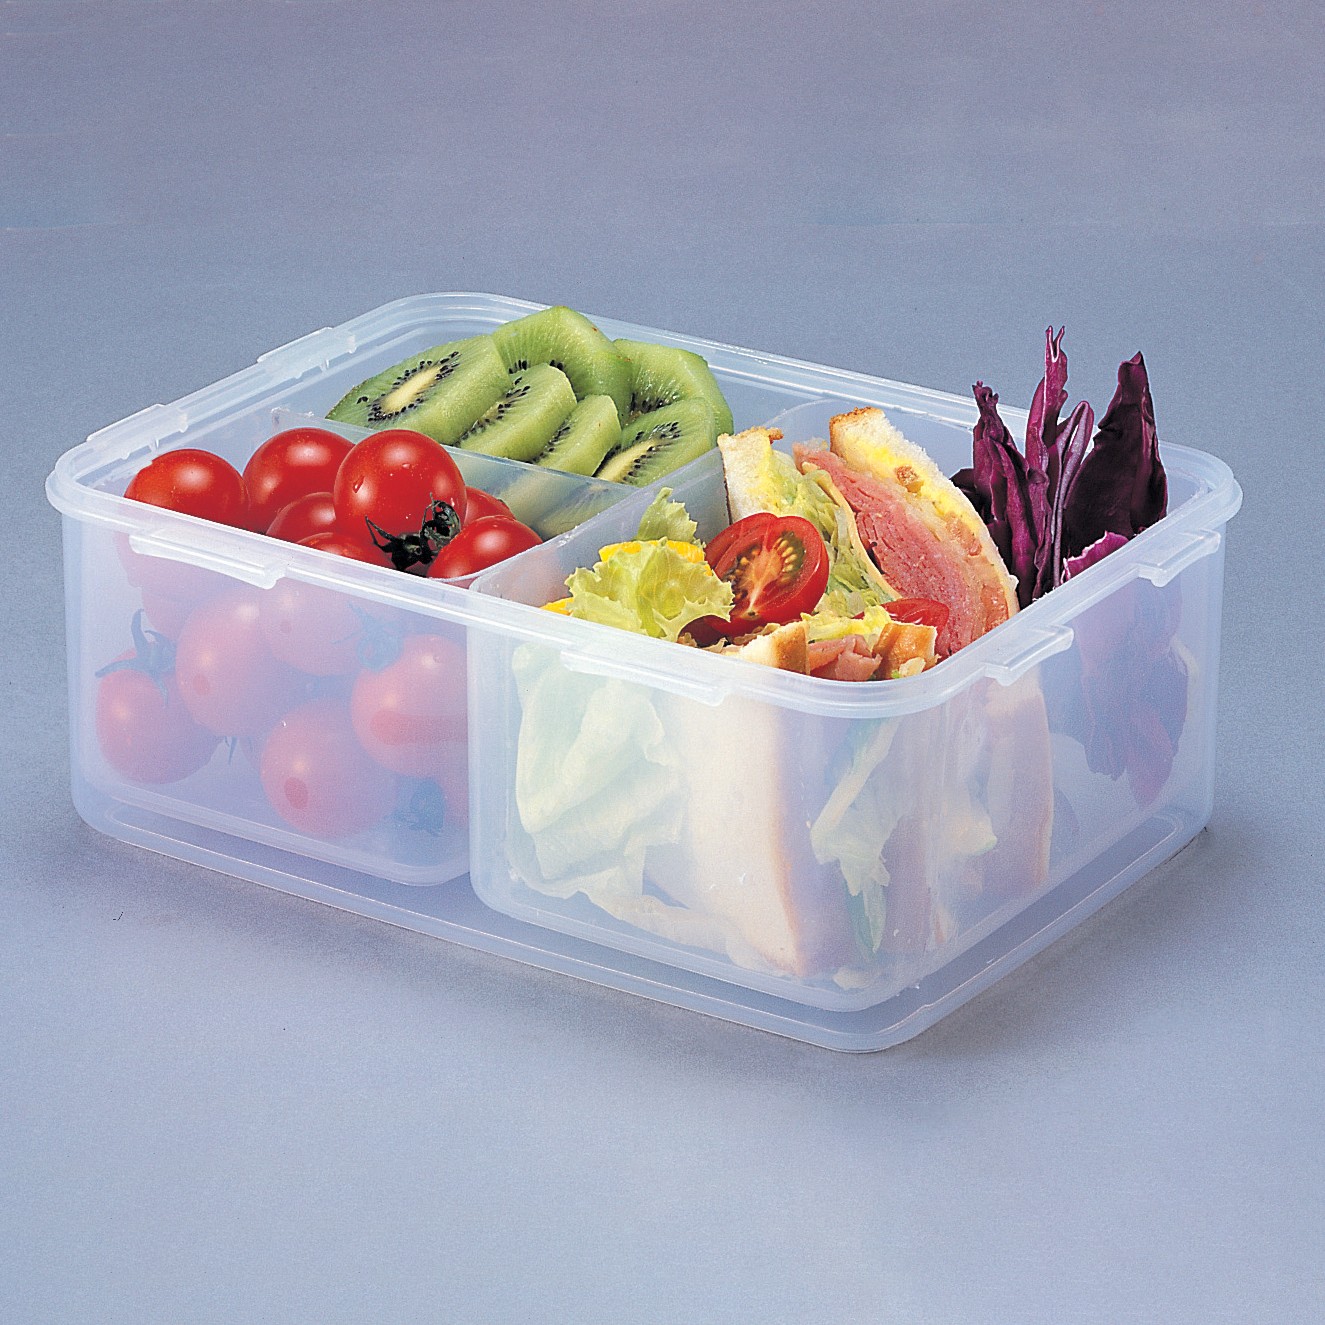 Microwaveable Food Container With Dividers 